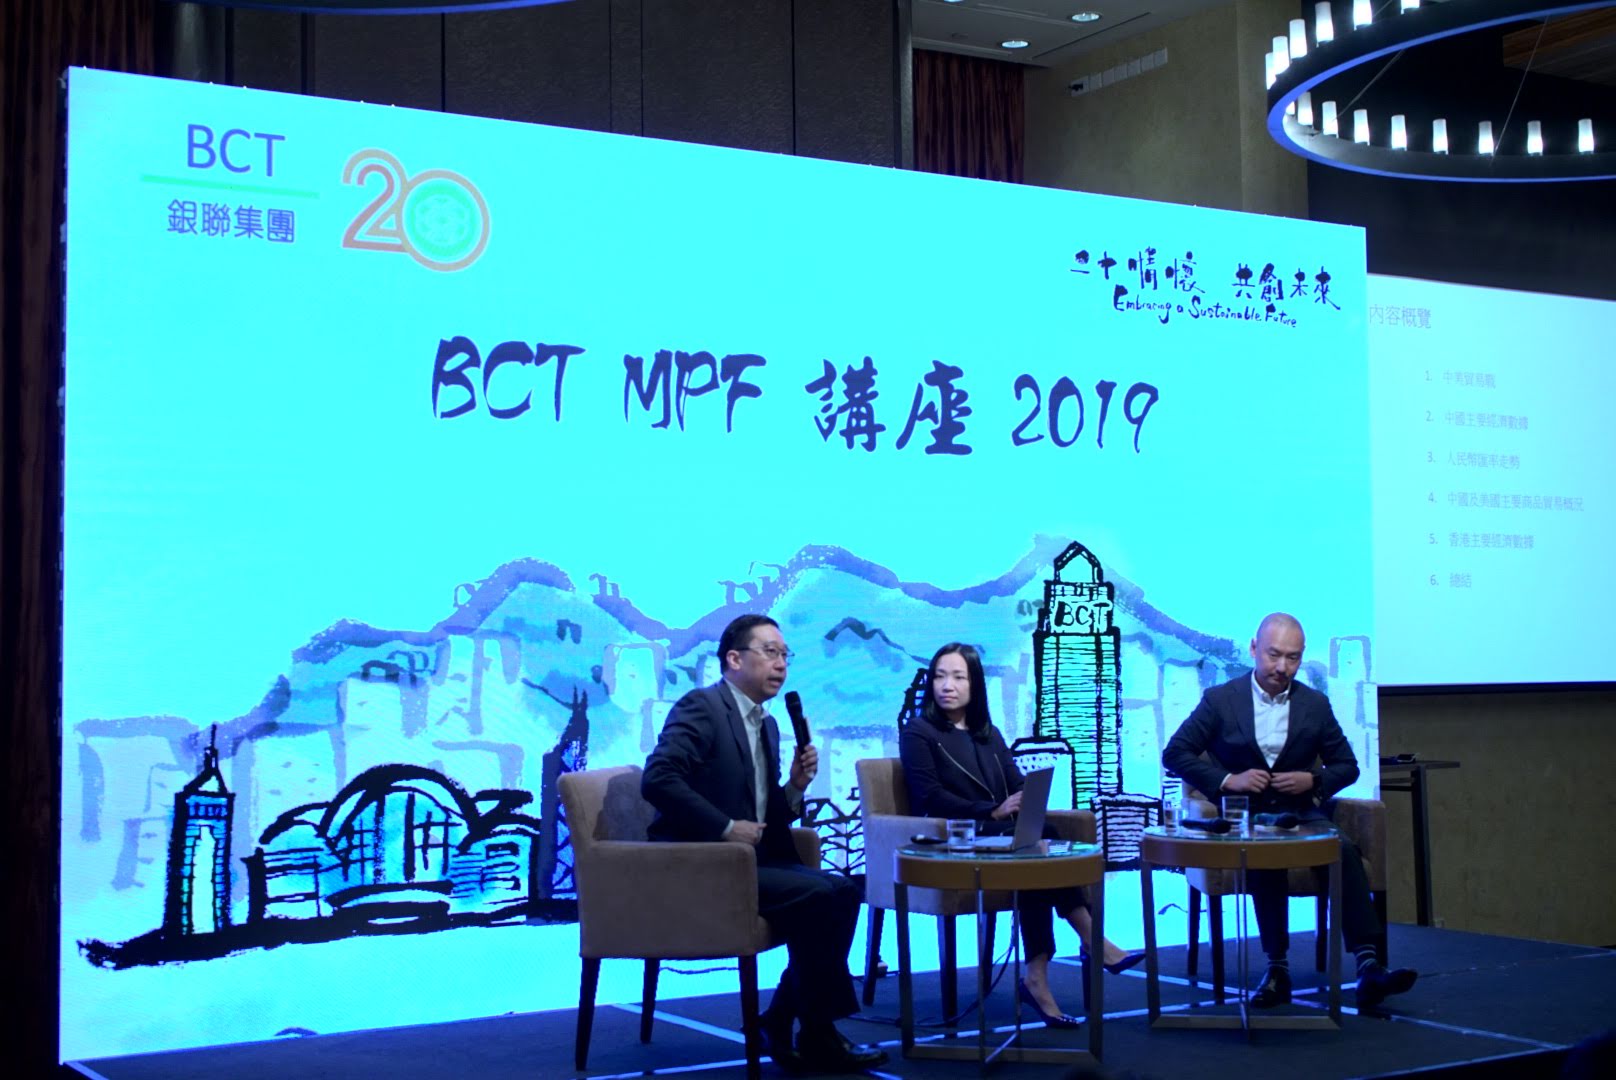 Panel discussion on China & Hong Kong market outlook and strategies